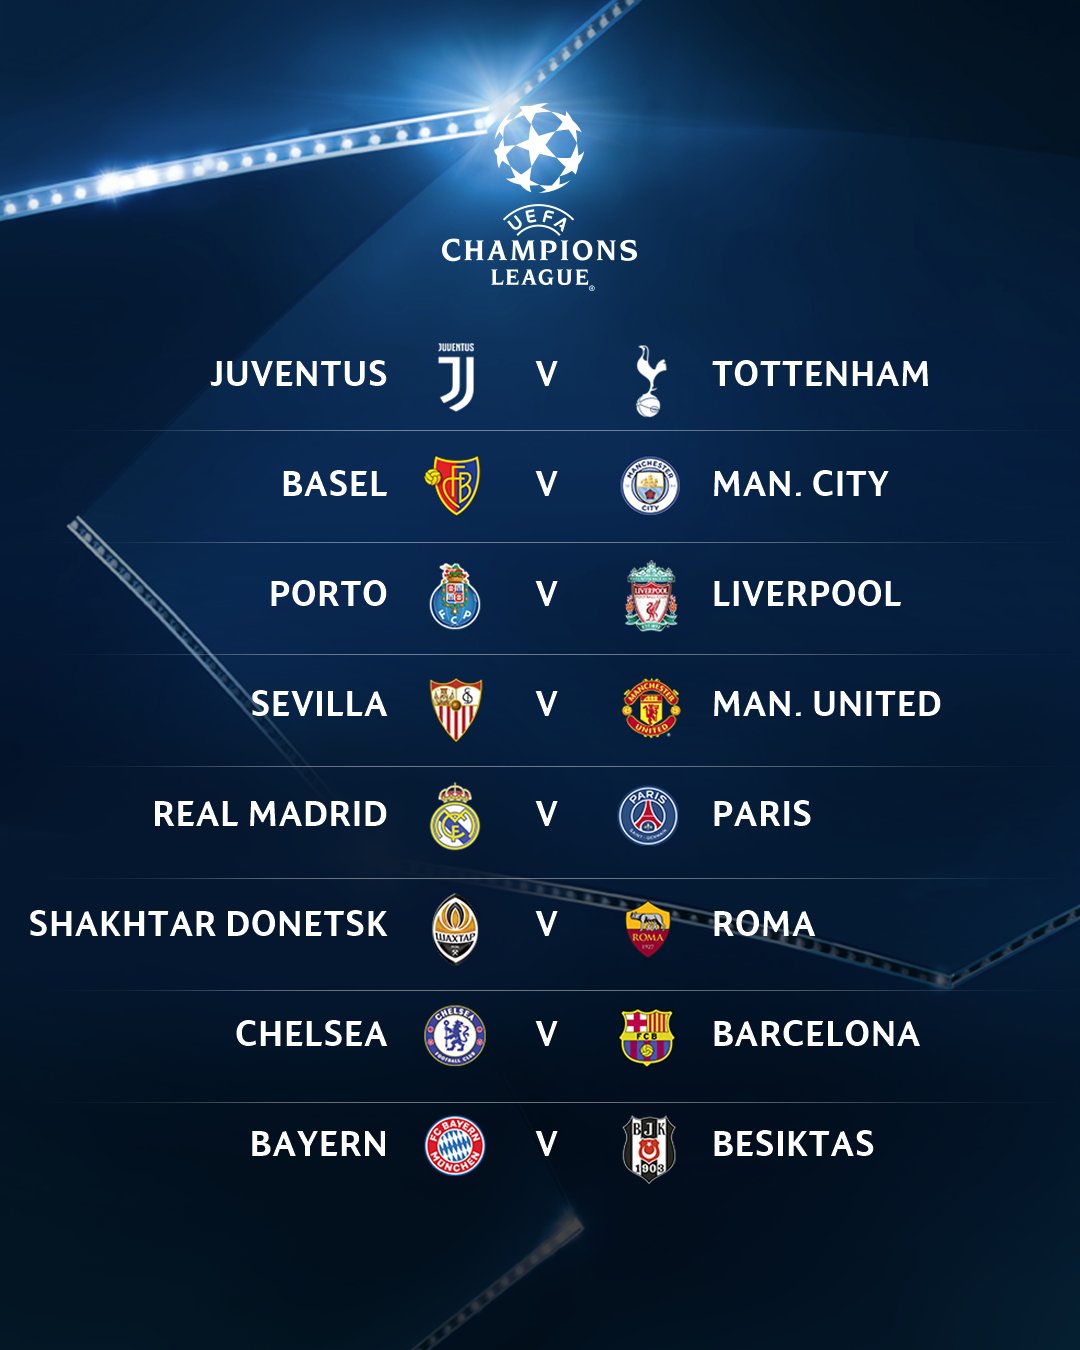 UCL Draw: Chelsea Get Barcelona, Madrid Get PSG - UCL Draw In Full